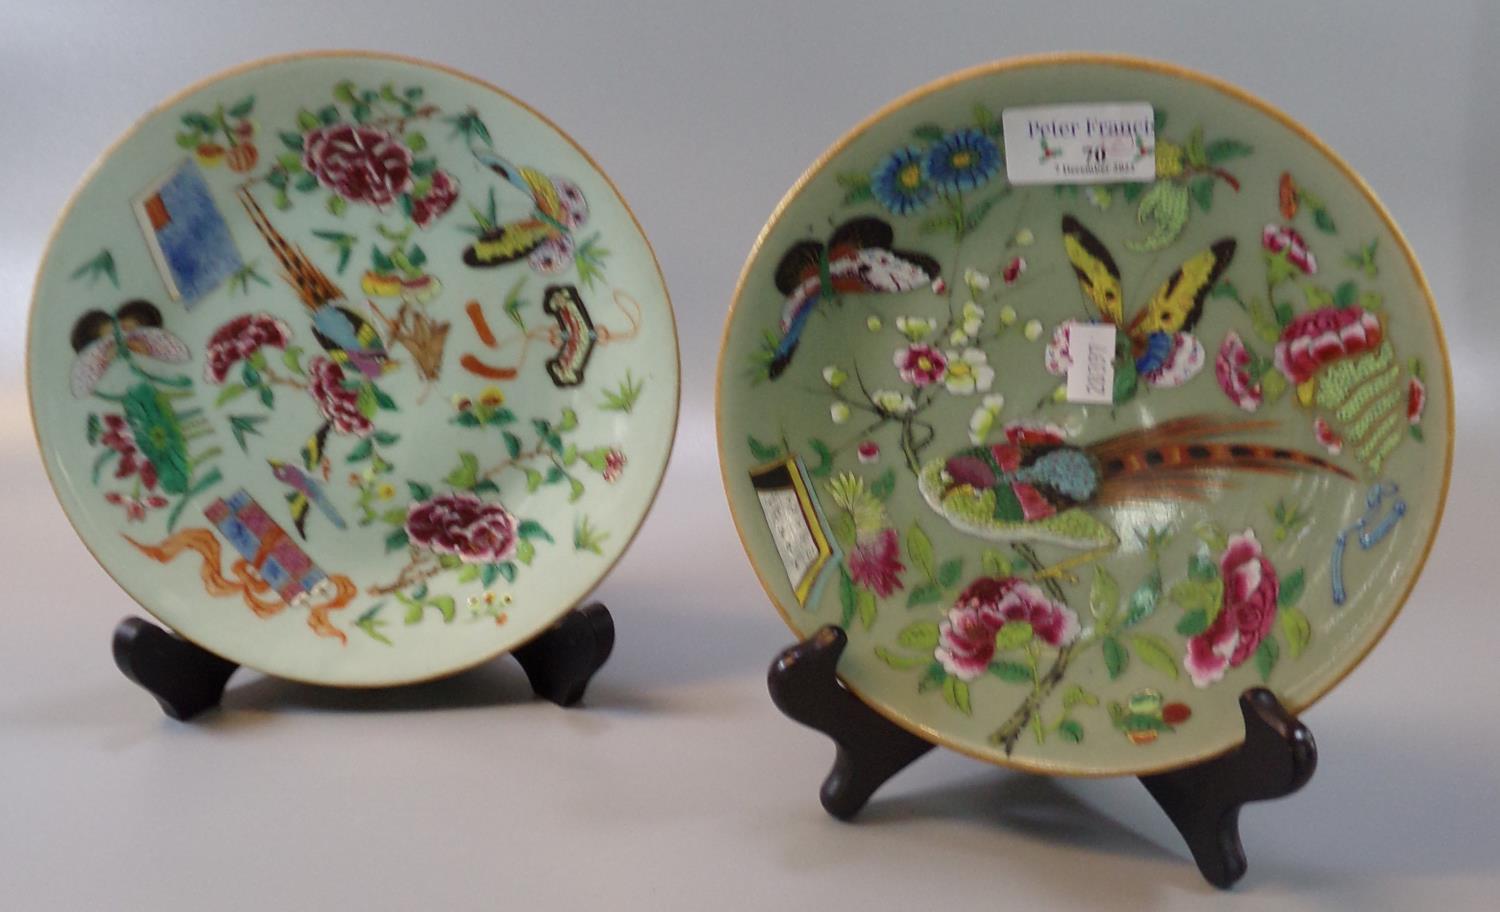 Two similar Chinese porcelain Famille rose dishes on a celadon glaze decorated with birds,